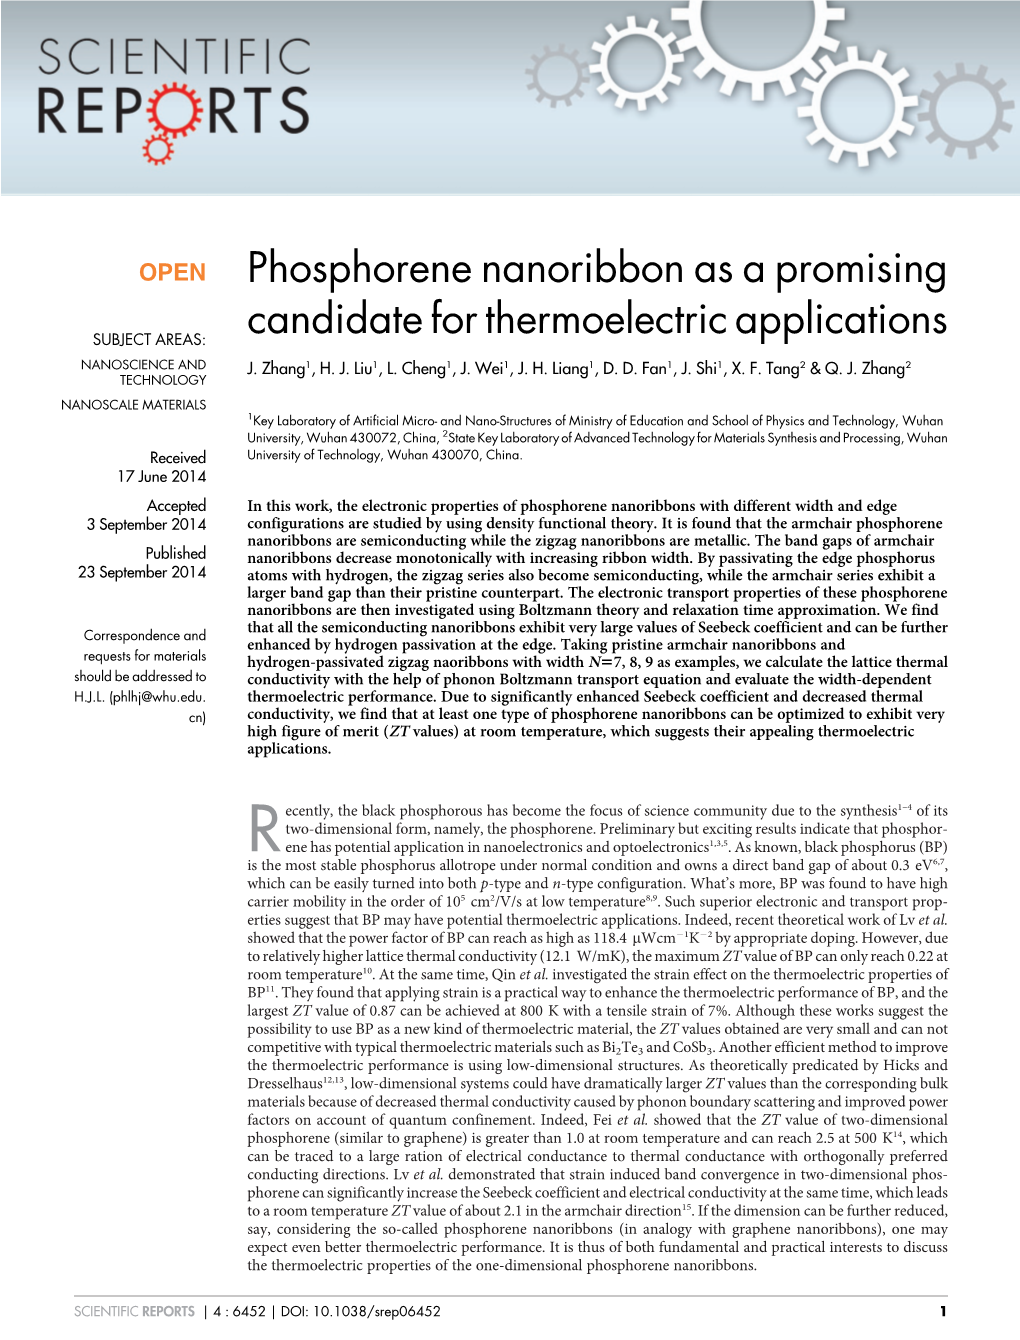 Phosphorene Nanoribbon As a Promising Candidate for Thermoelectric Applications